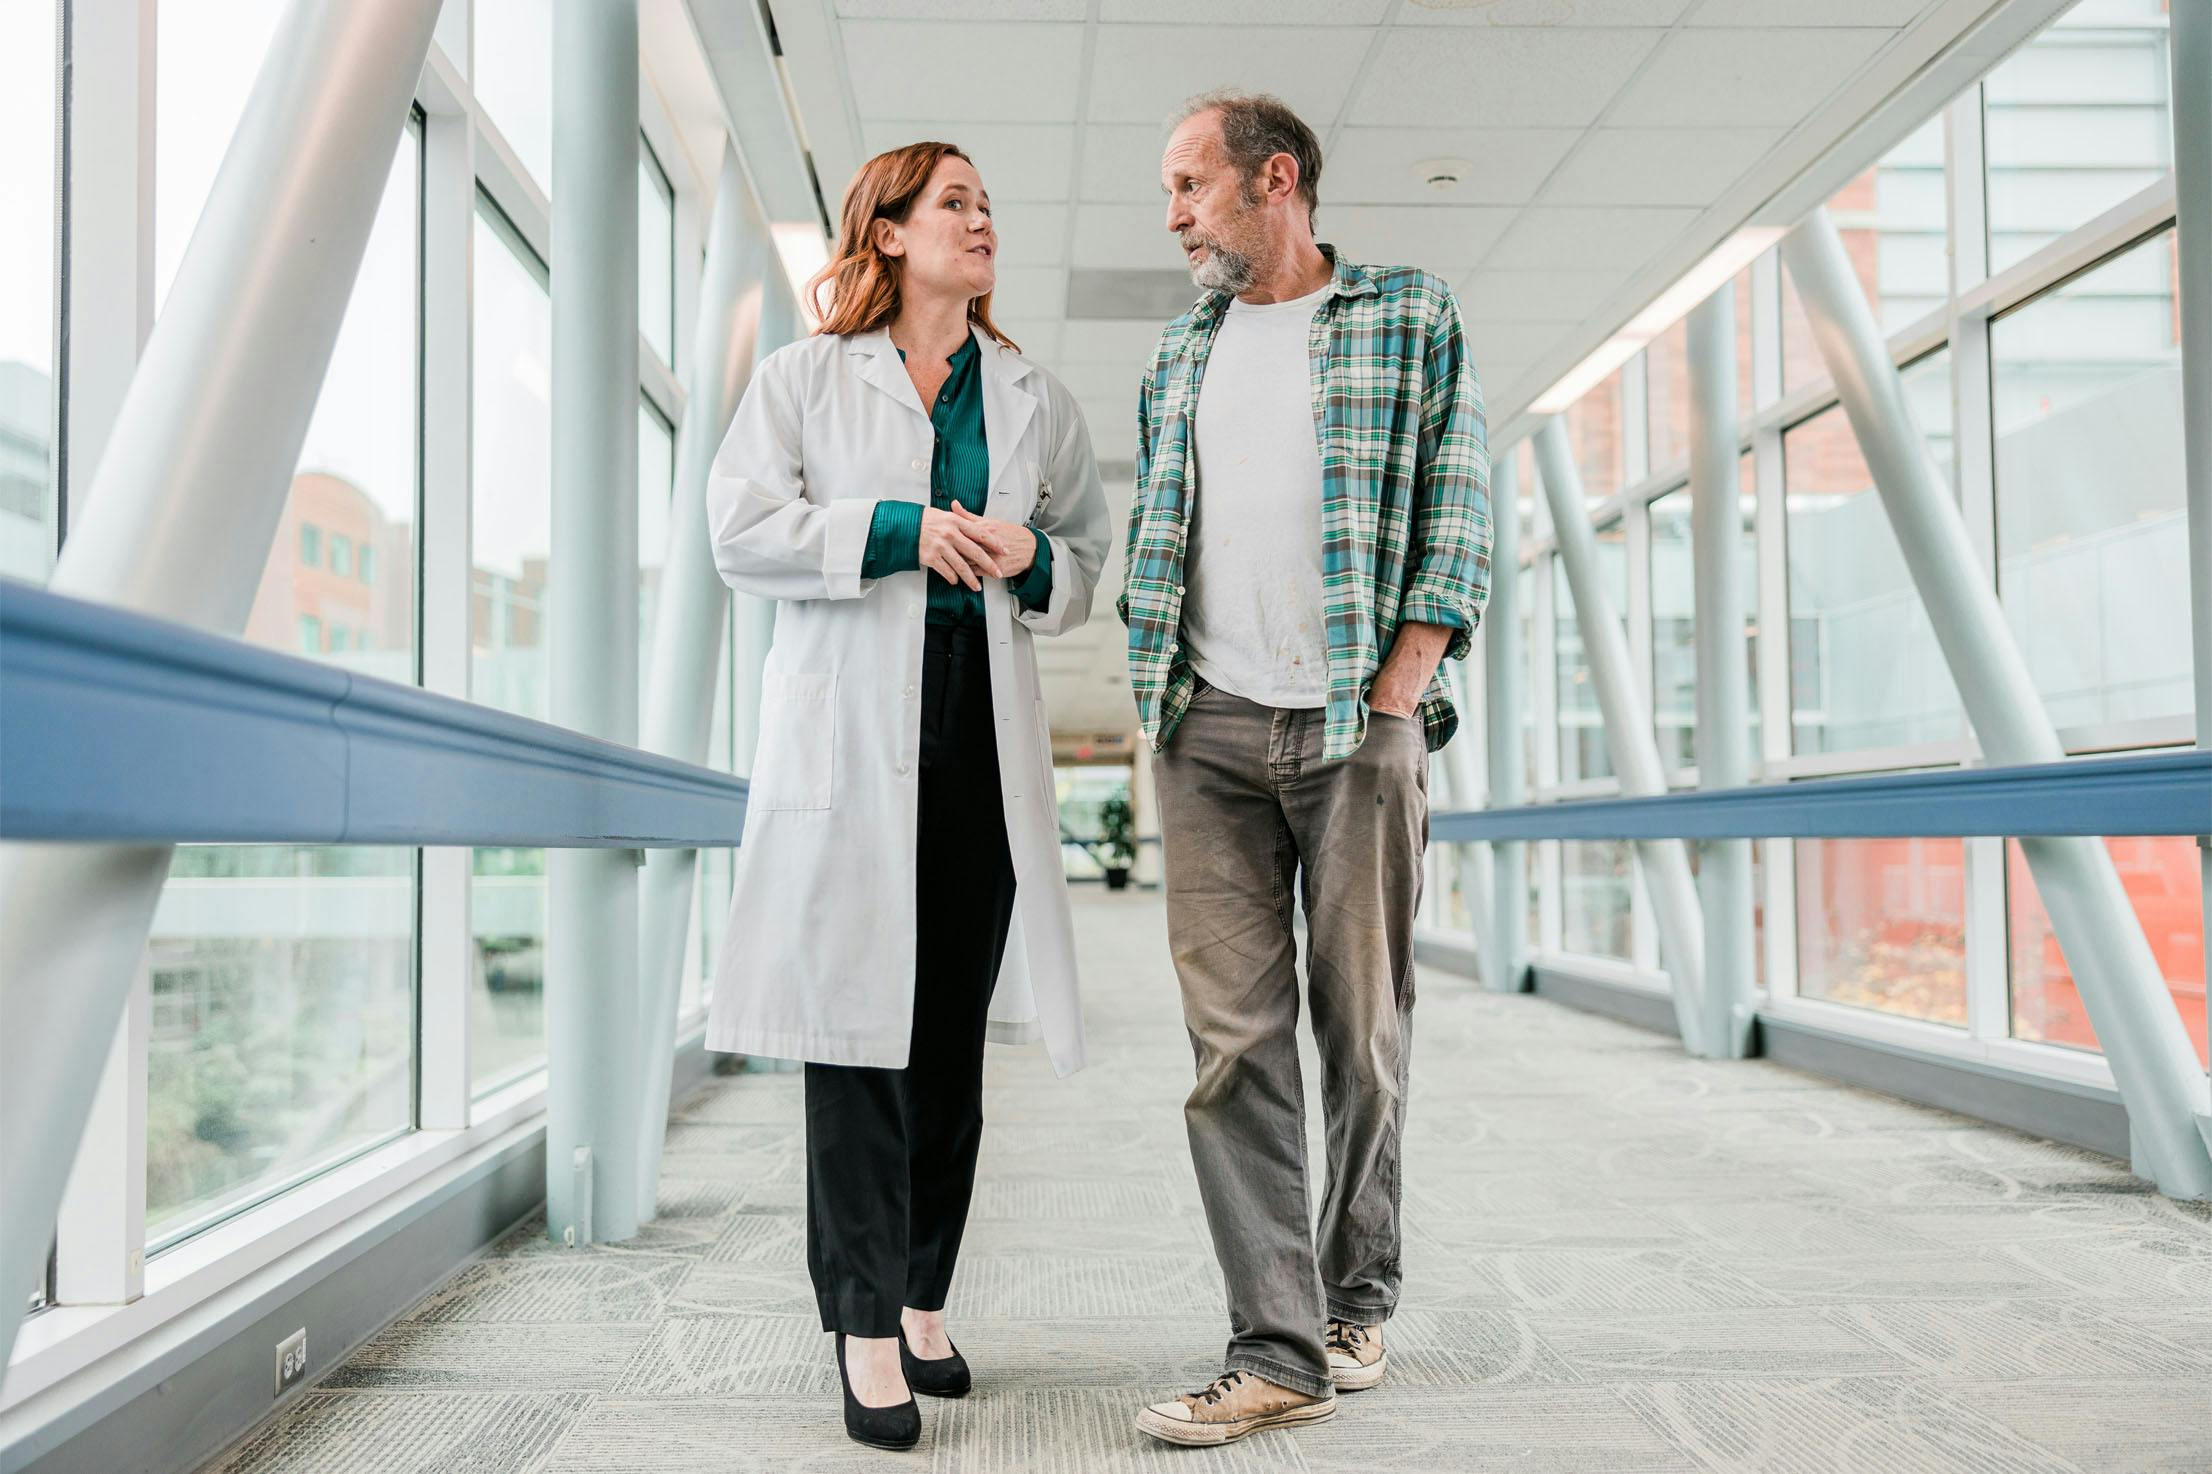 Image from Salem Health brand campaign; doctor speaking with Homeless man